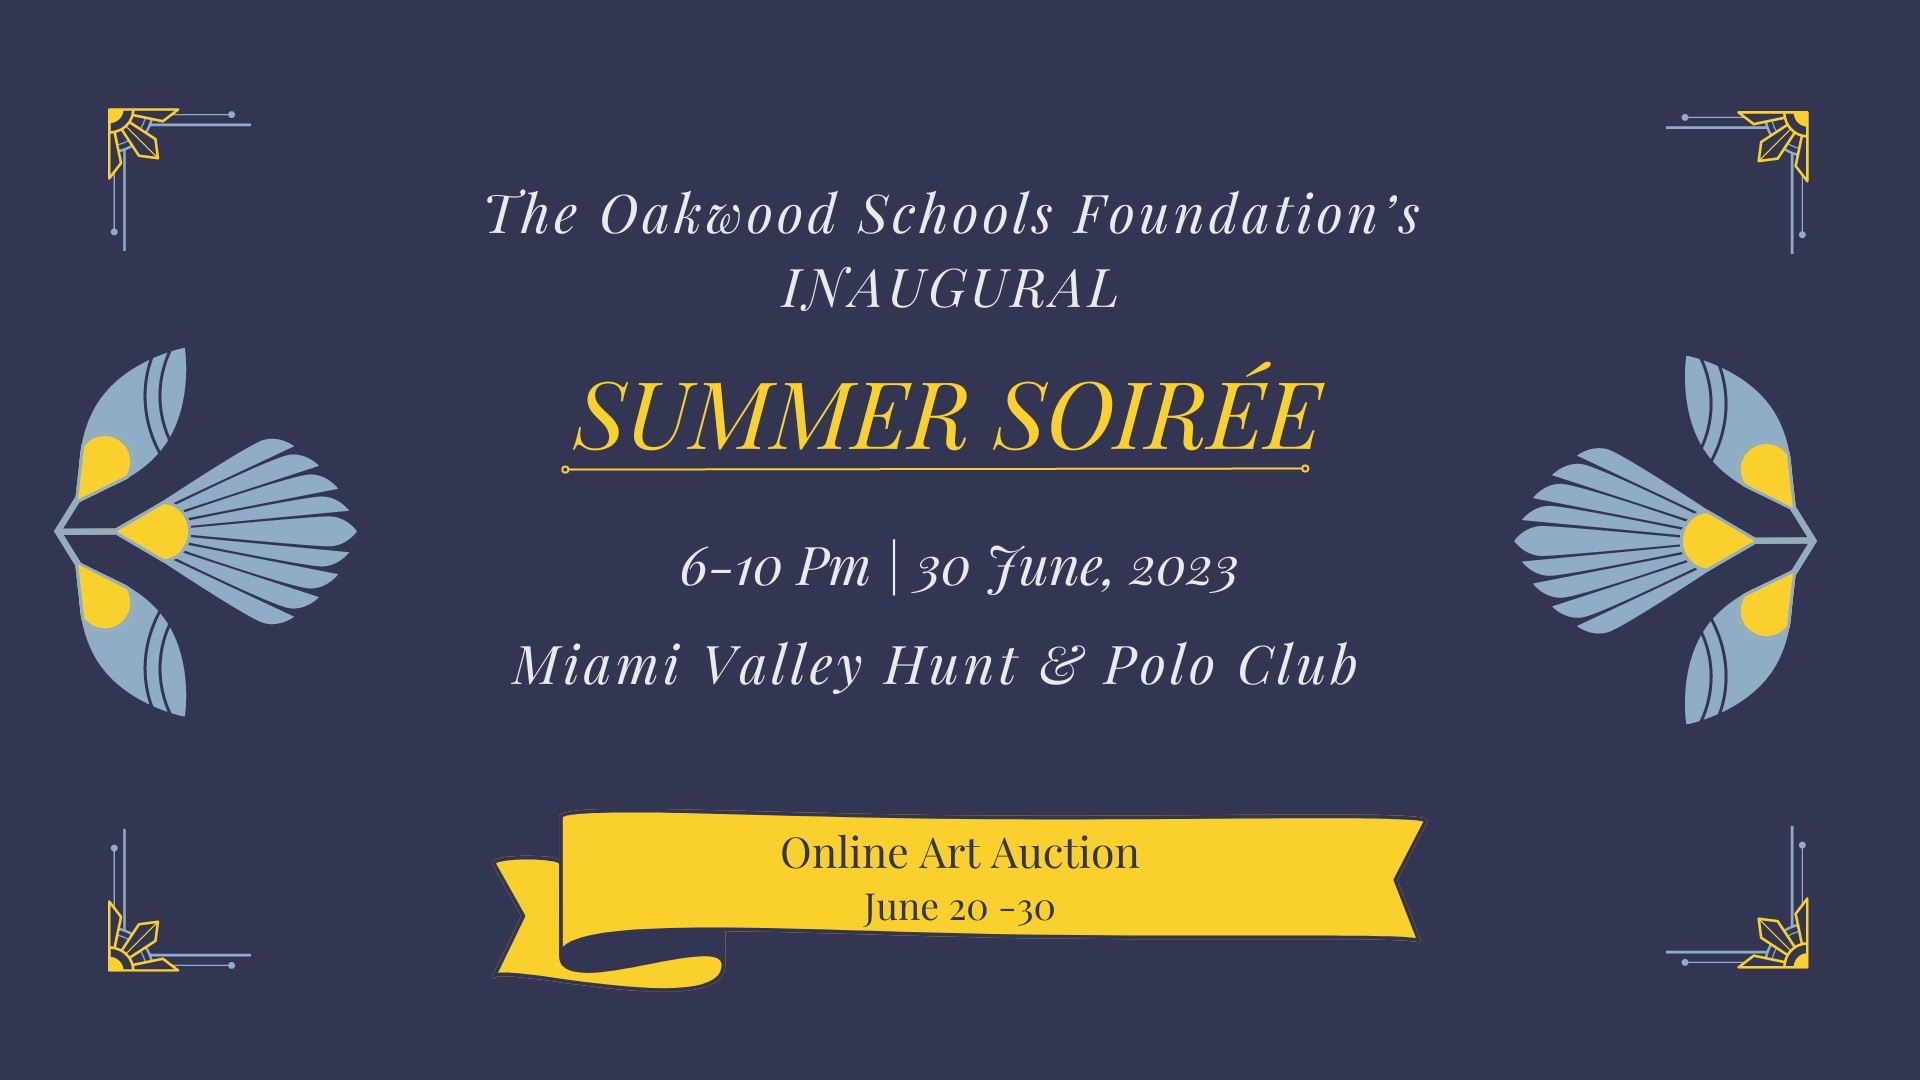 Summer Soiree Save the Date